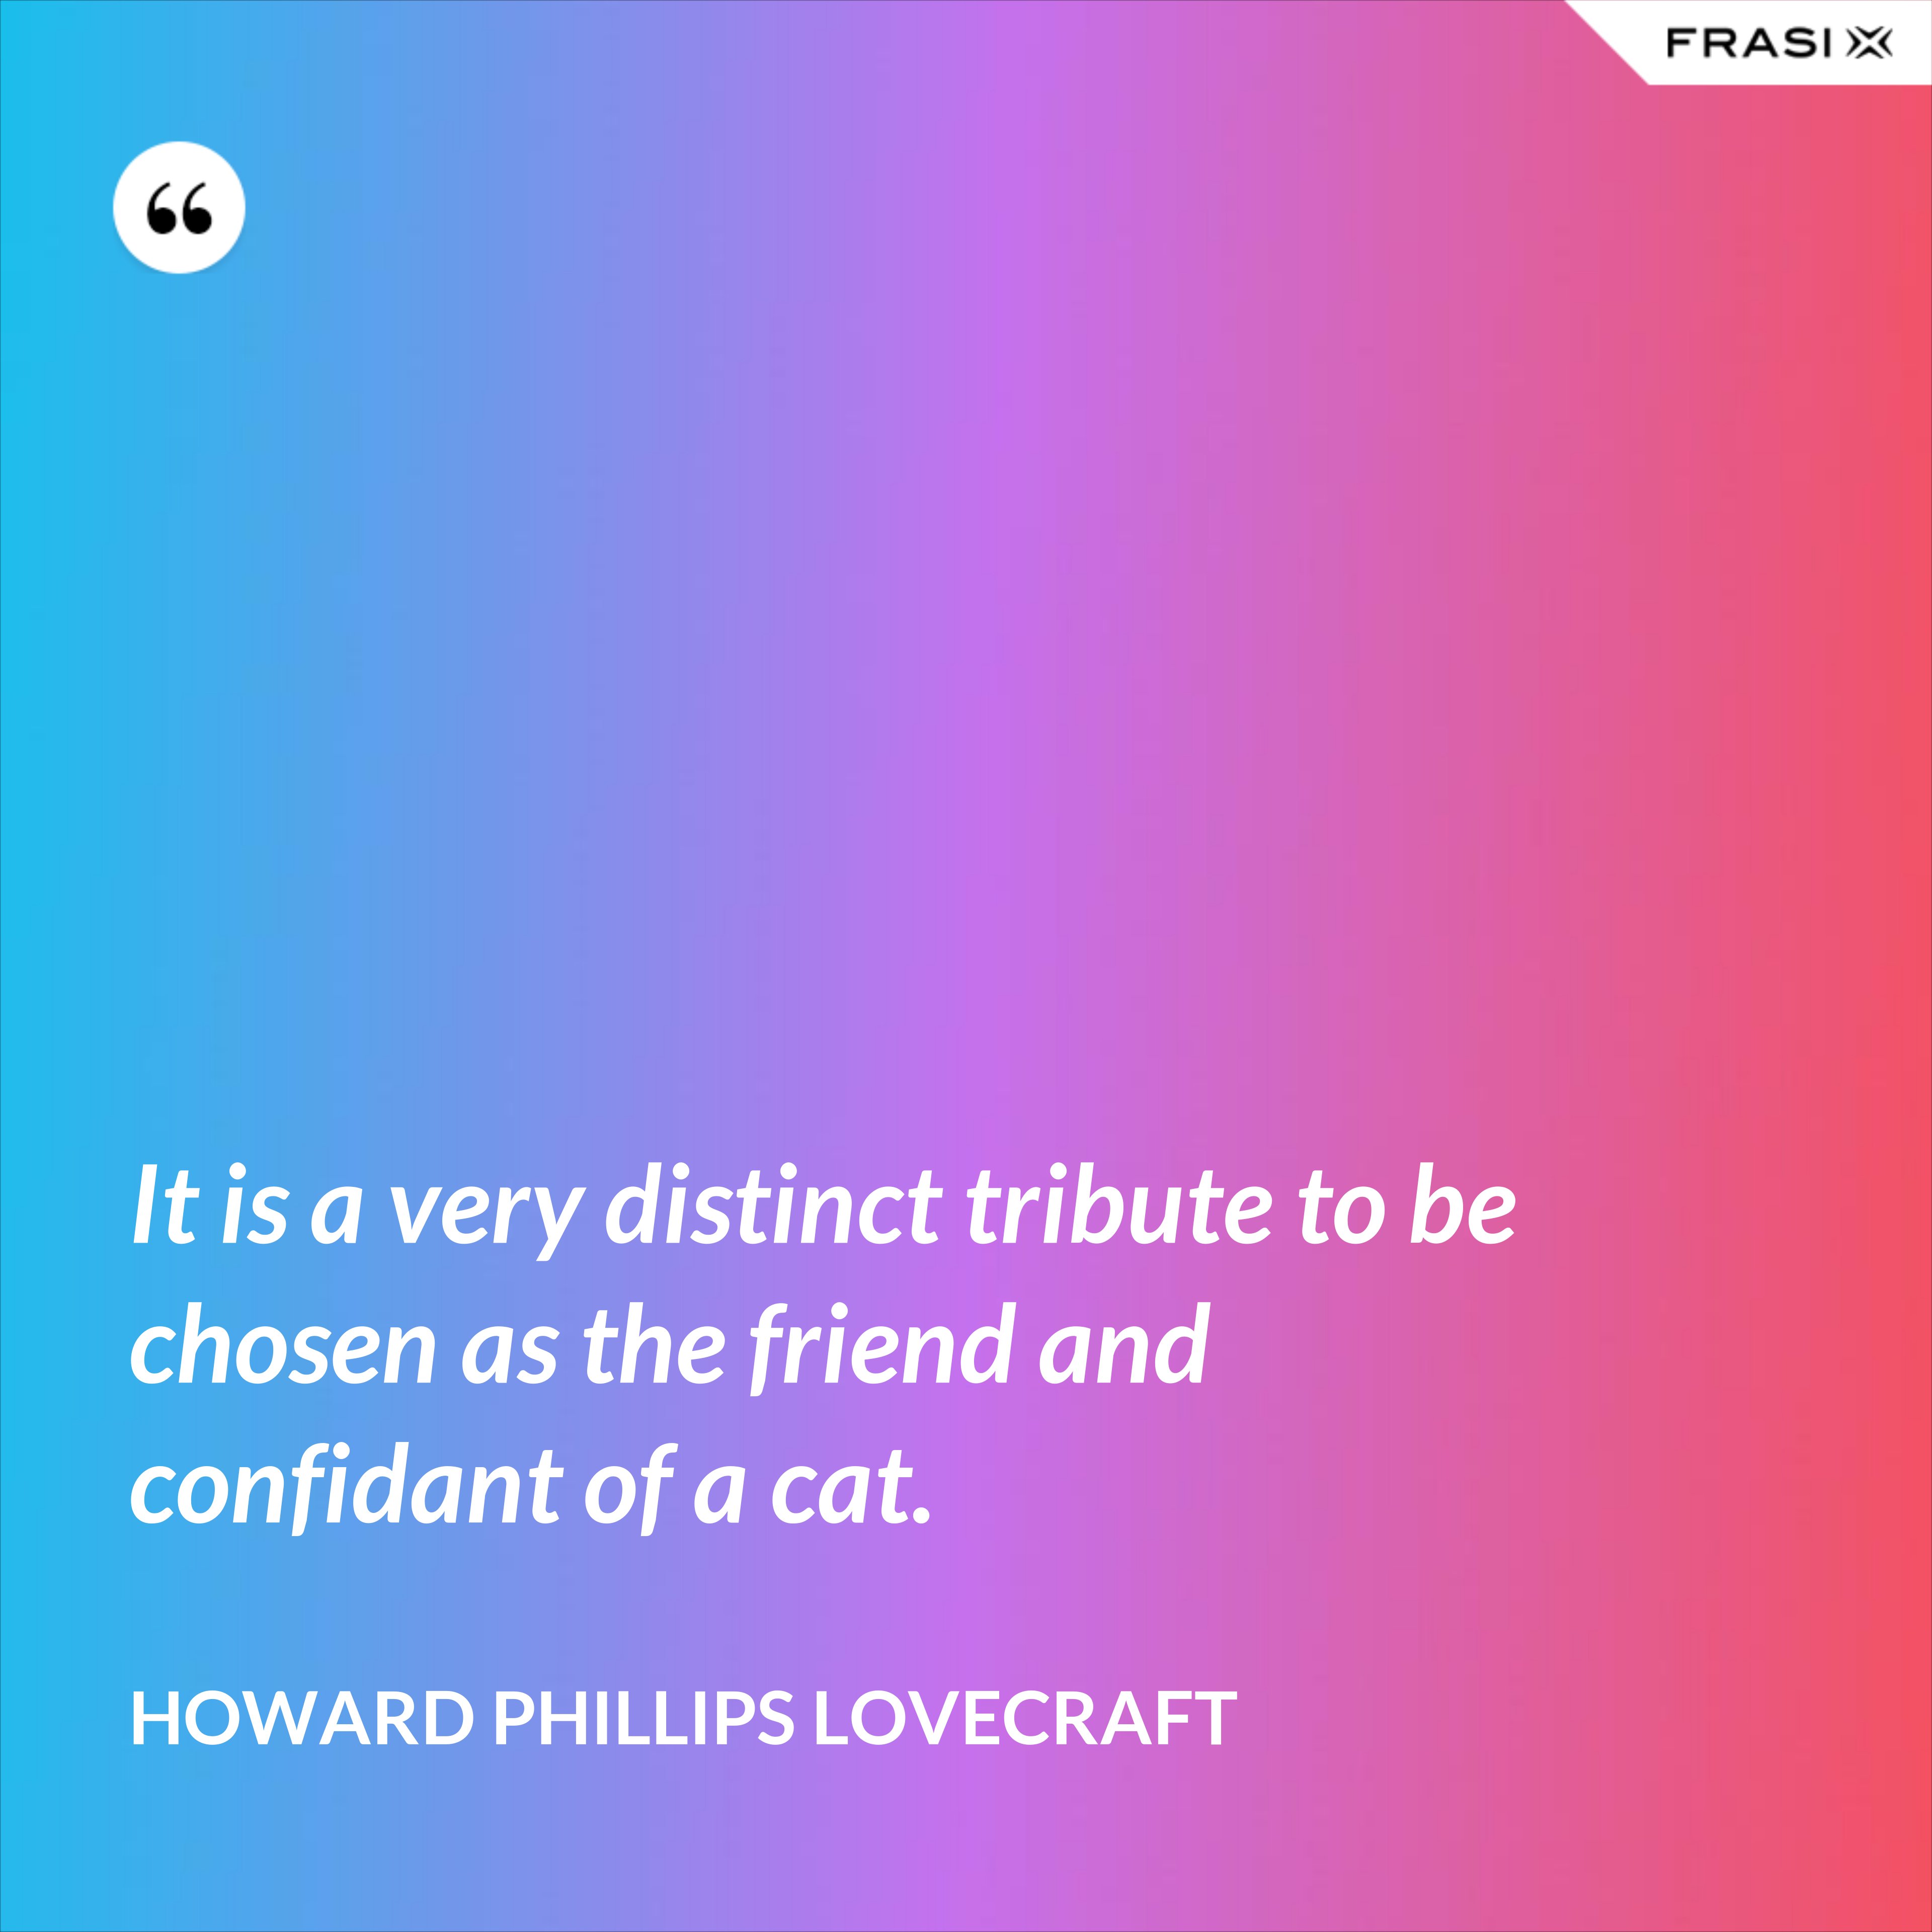 It is a very distinct tribute to be chosen as the friend and confidant of a cat. - Howard Phillips Lovecraft